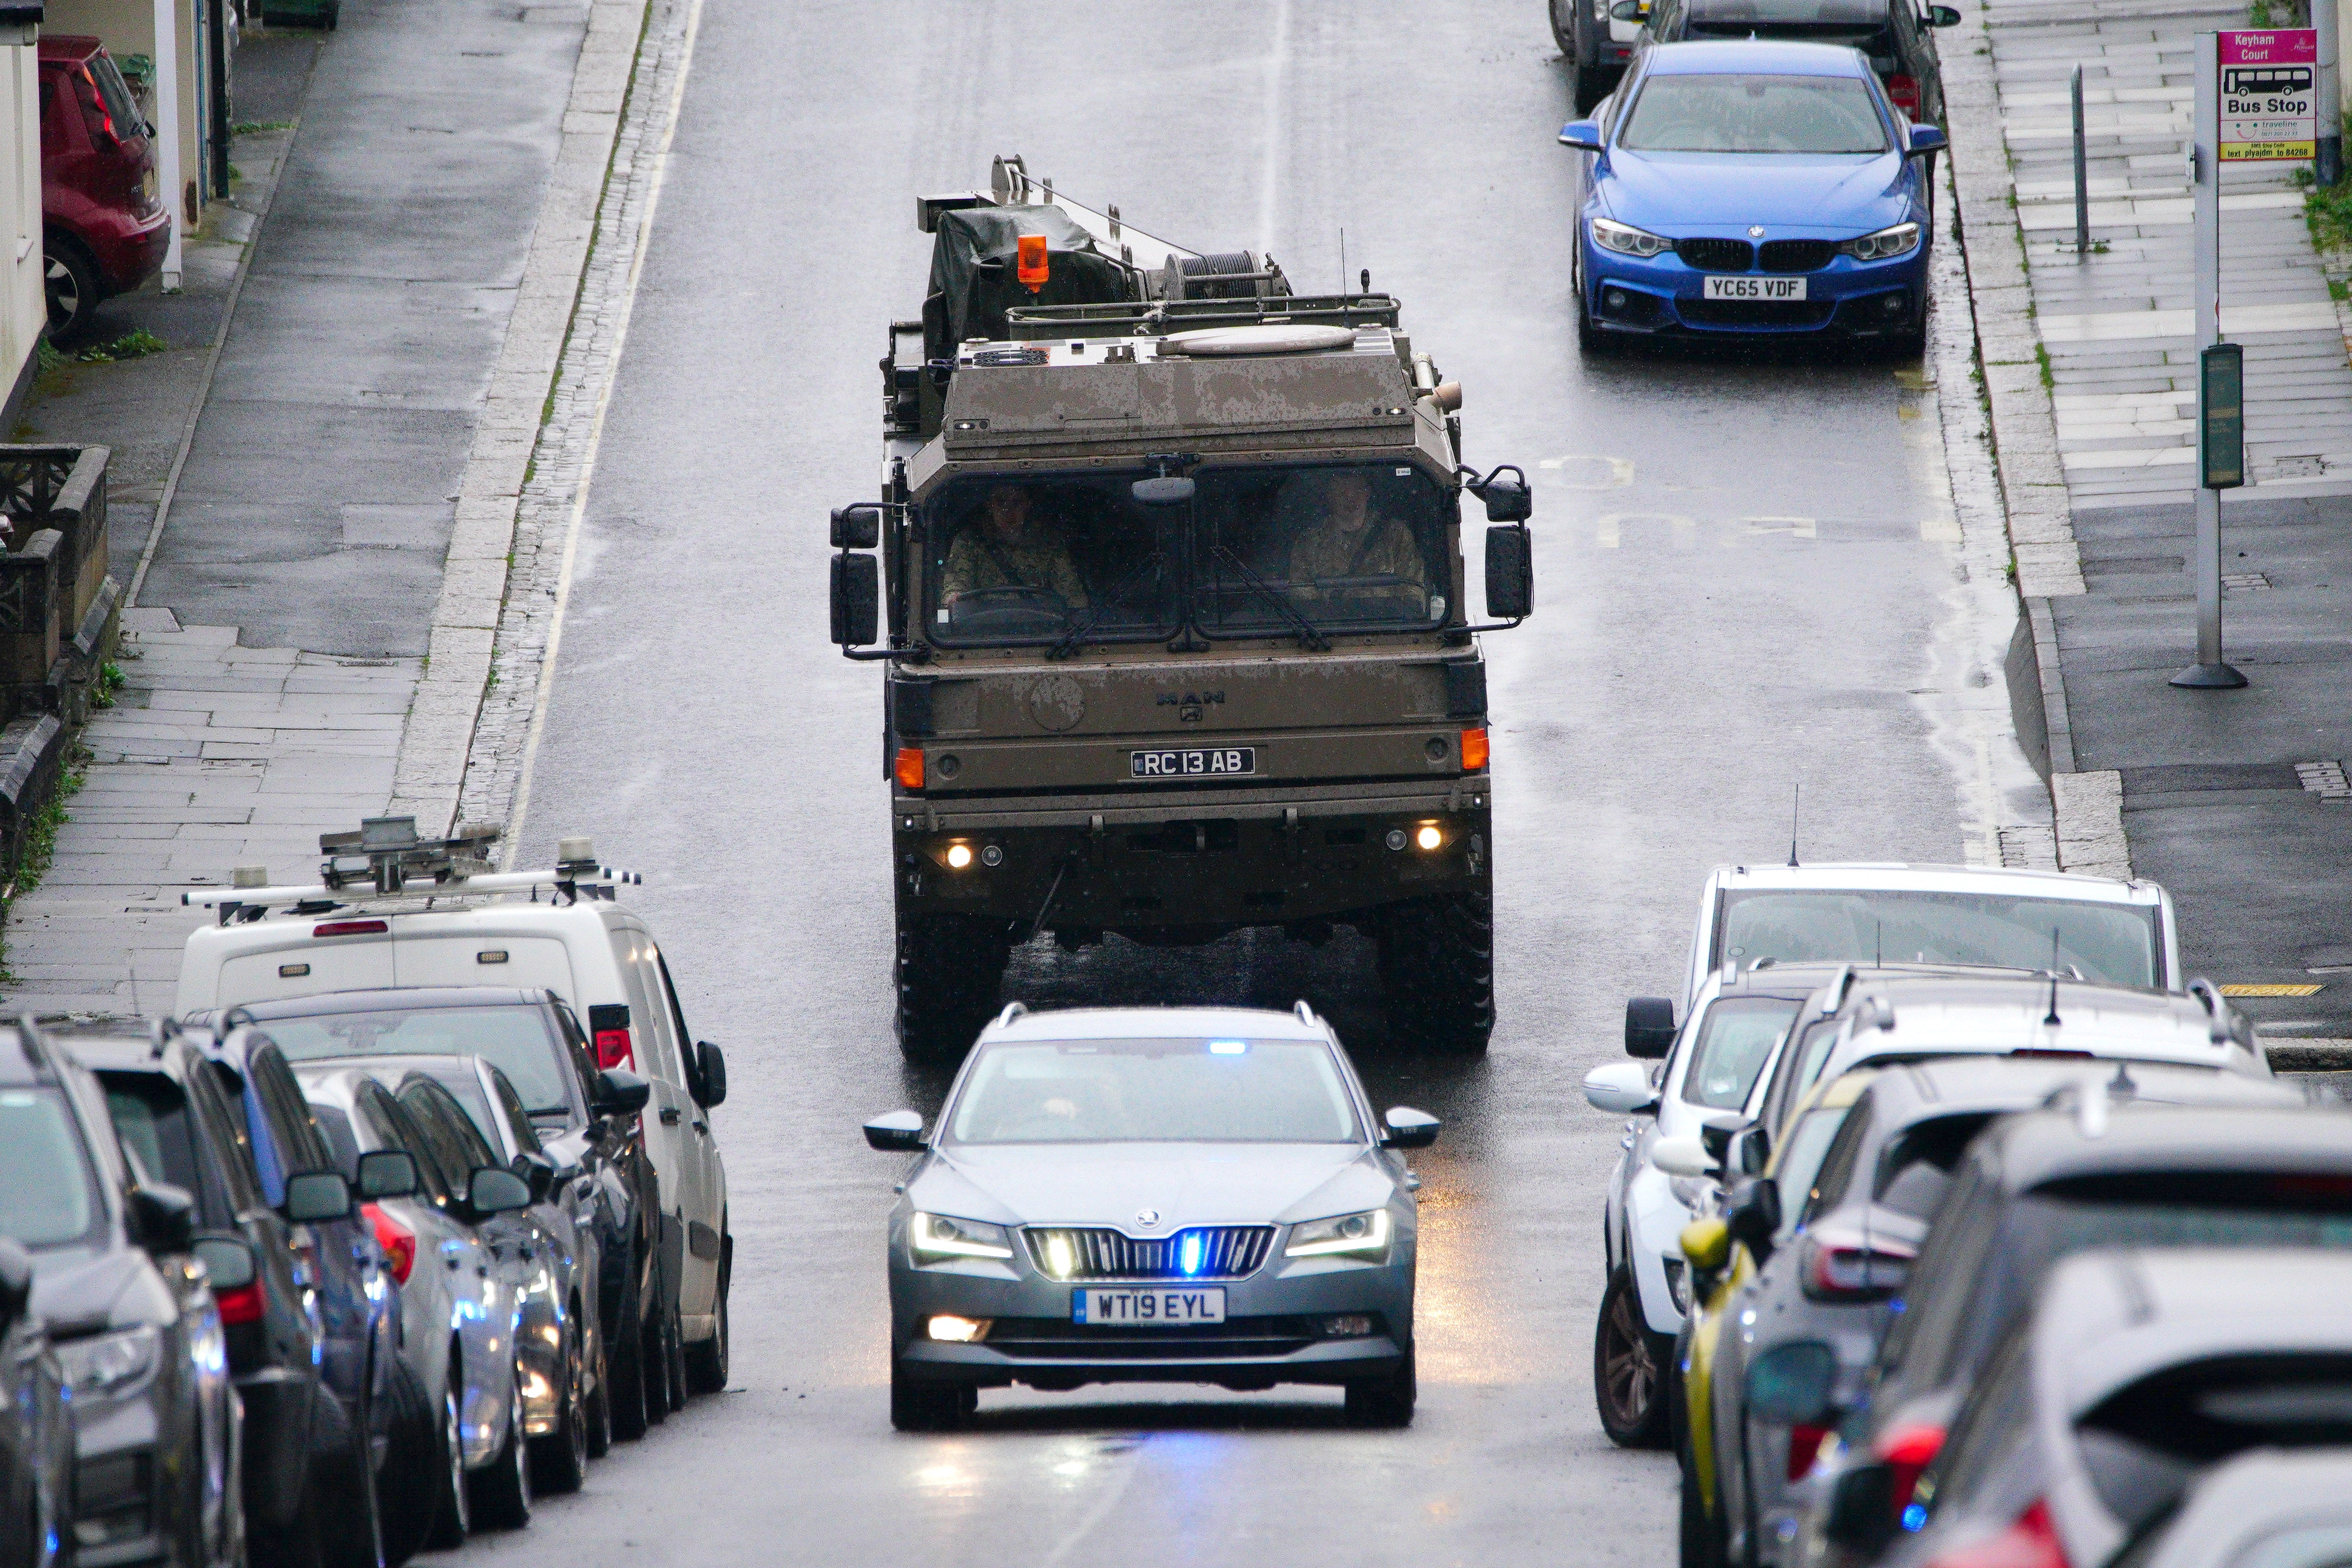 A military vehicle at the scene near St Michael Avenue, Plymouth, where residents have been evacuated and a cordon put in place following the discovery of a suspected Second World War explosive device